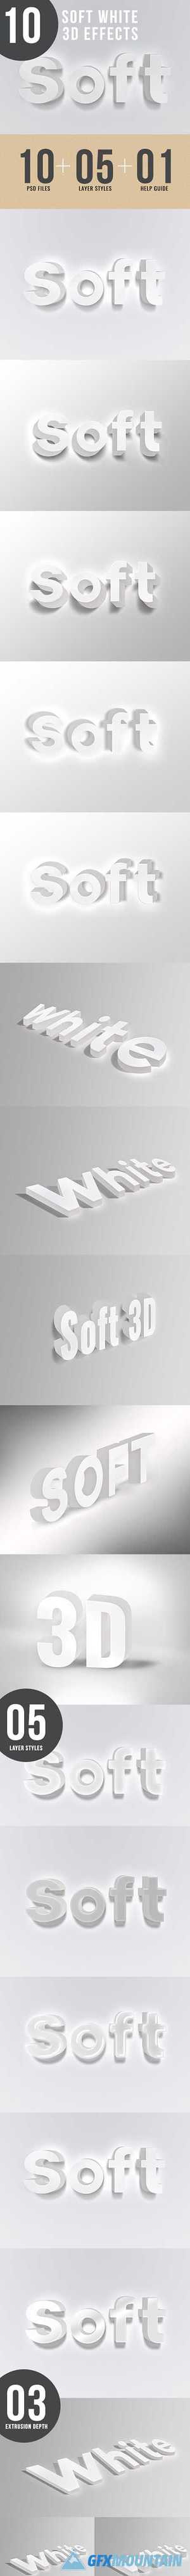 Simple White 3D Text Effects 23844260